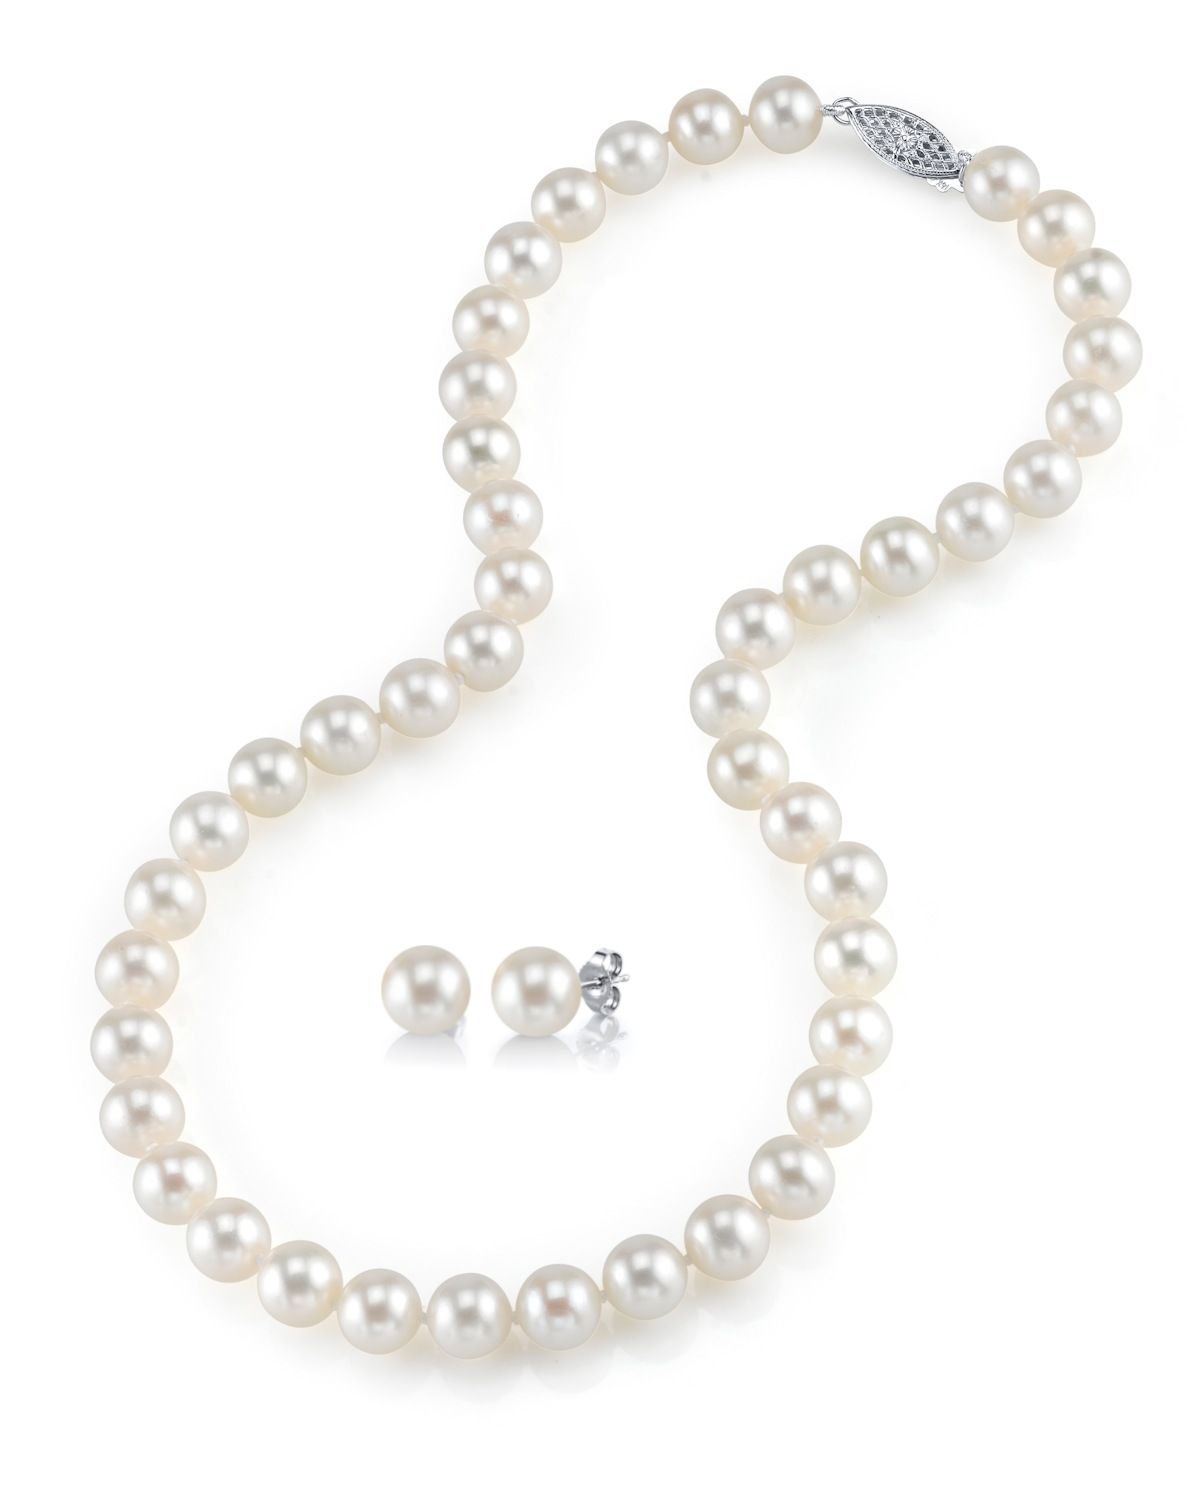 SPT 7.0-7.5mm Freshwater Pearl Necklace & Earrings 51 Rope Length / 7.0-7.5mm AAAA Quality / Ball Clasp 14K Yellow Gold